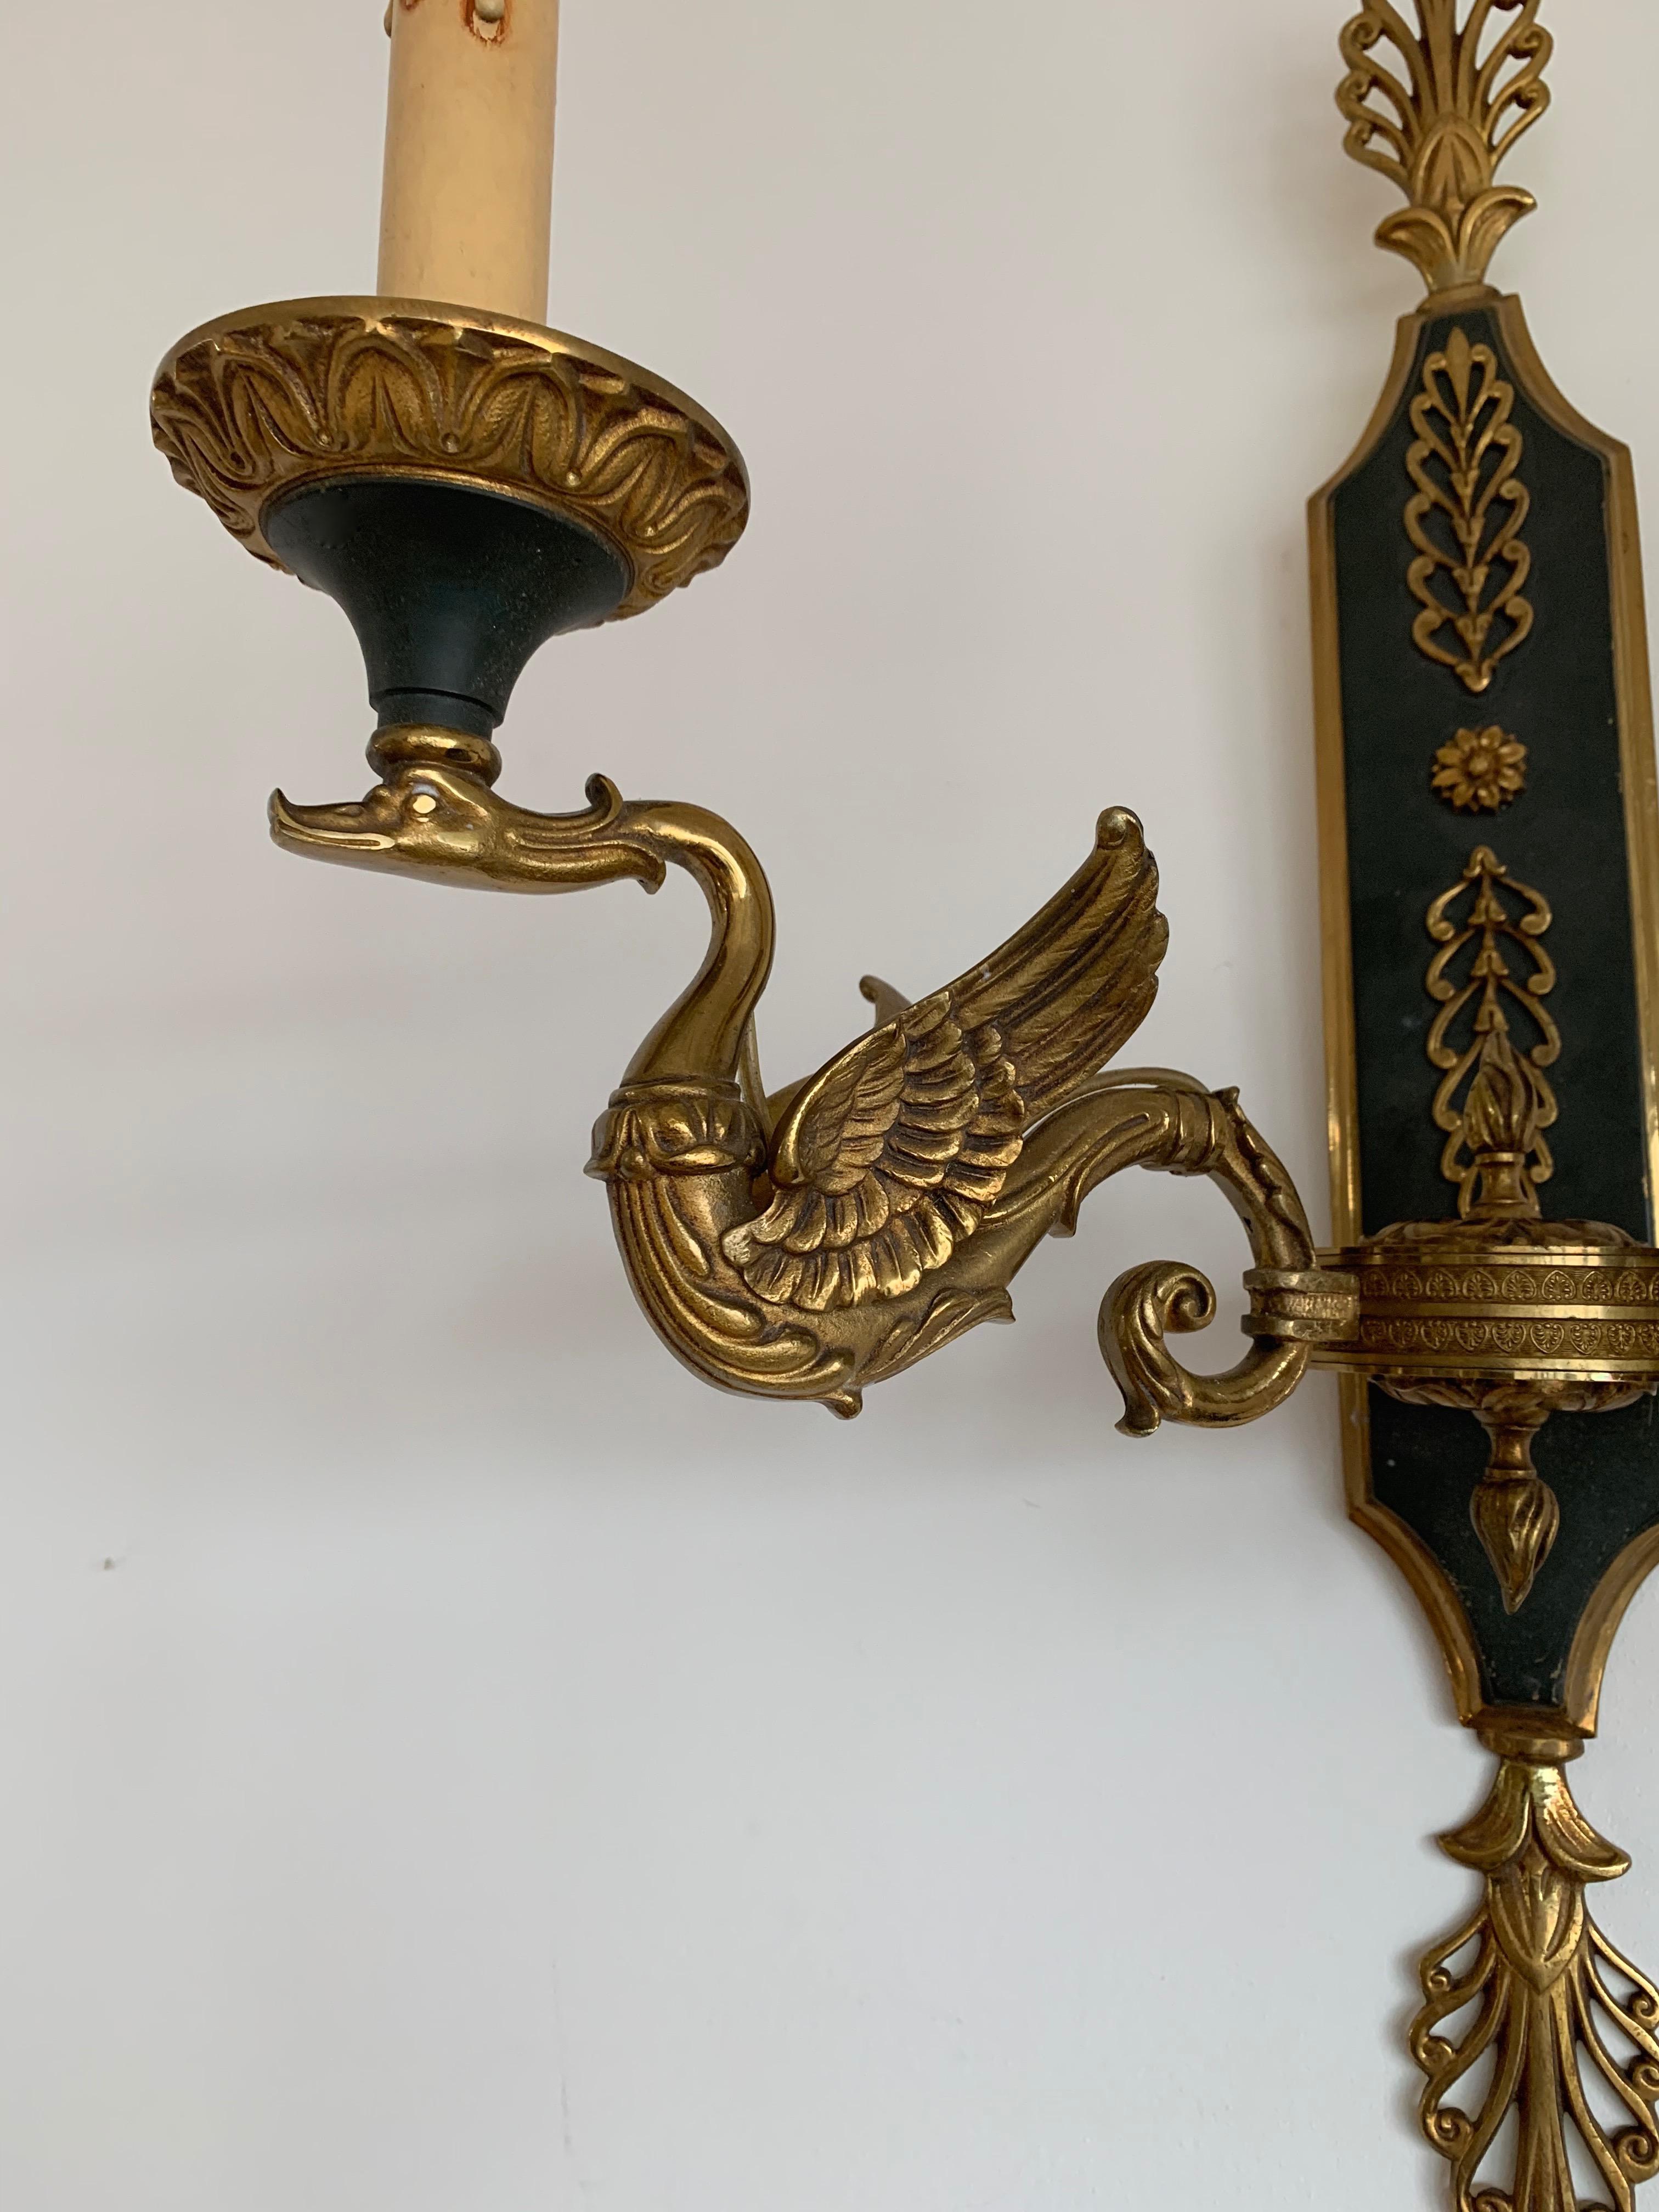 Hand-Crafted Large Pair, Empire Revival Bronze Swan Sculpture Wall Sconces / Light Fixtures For Sale